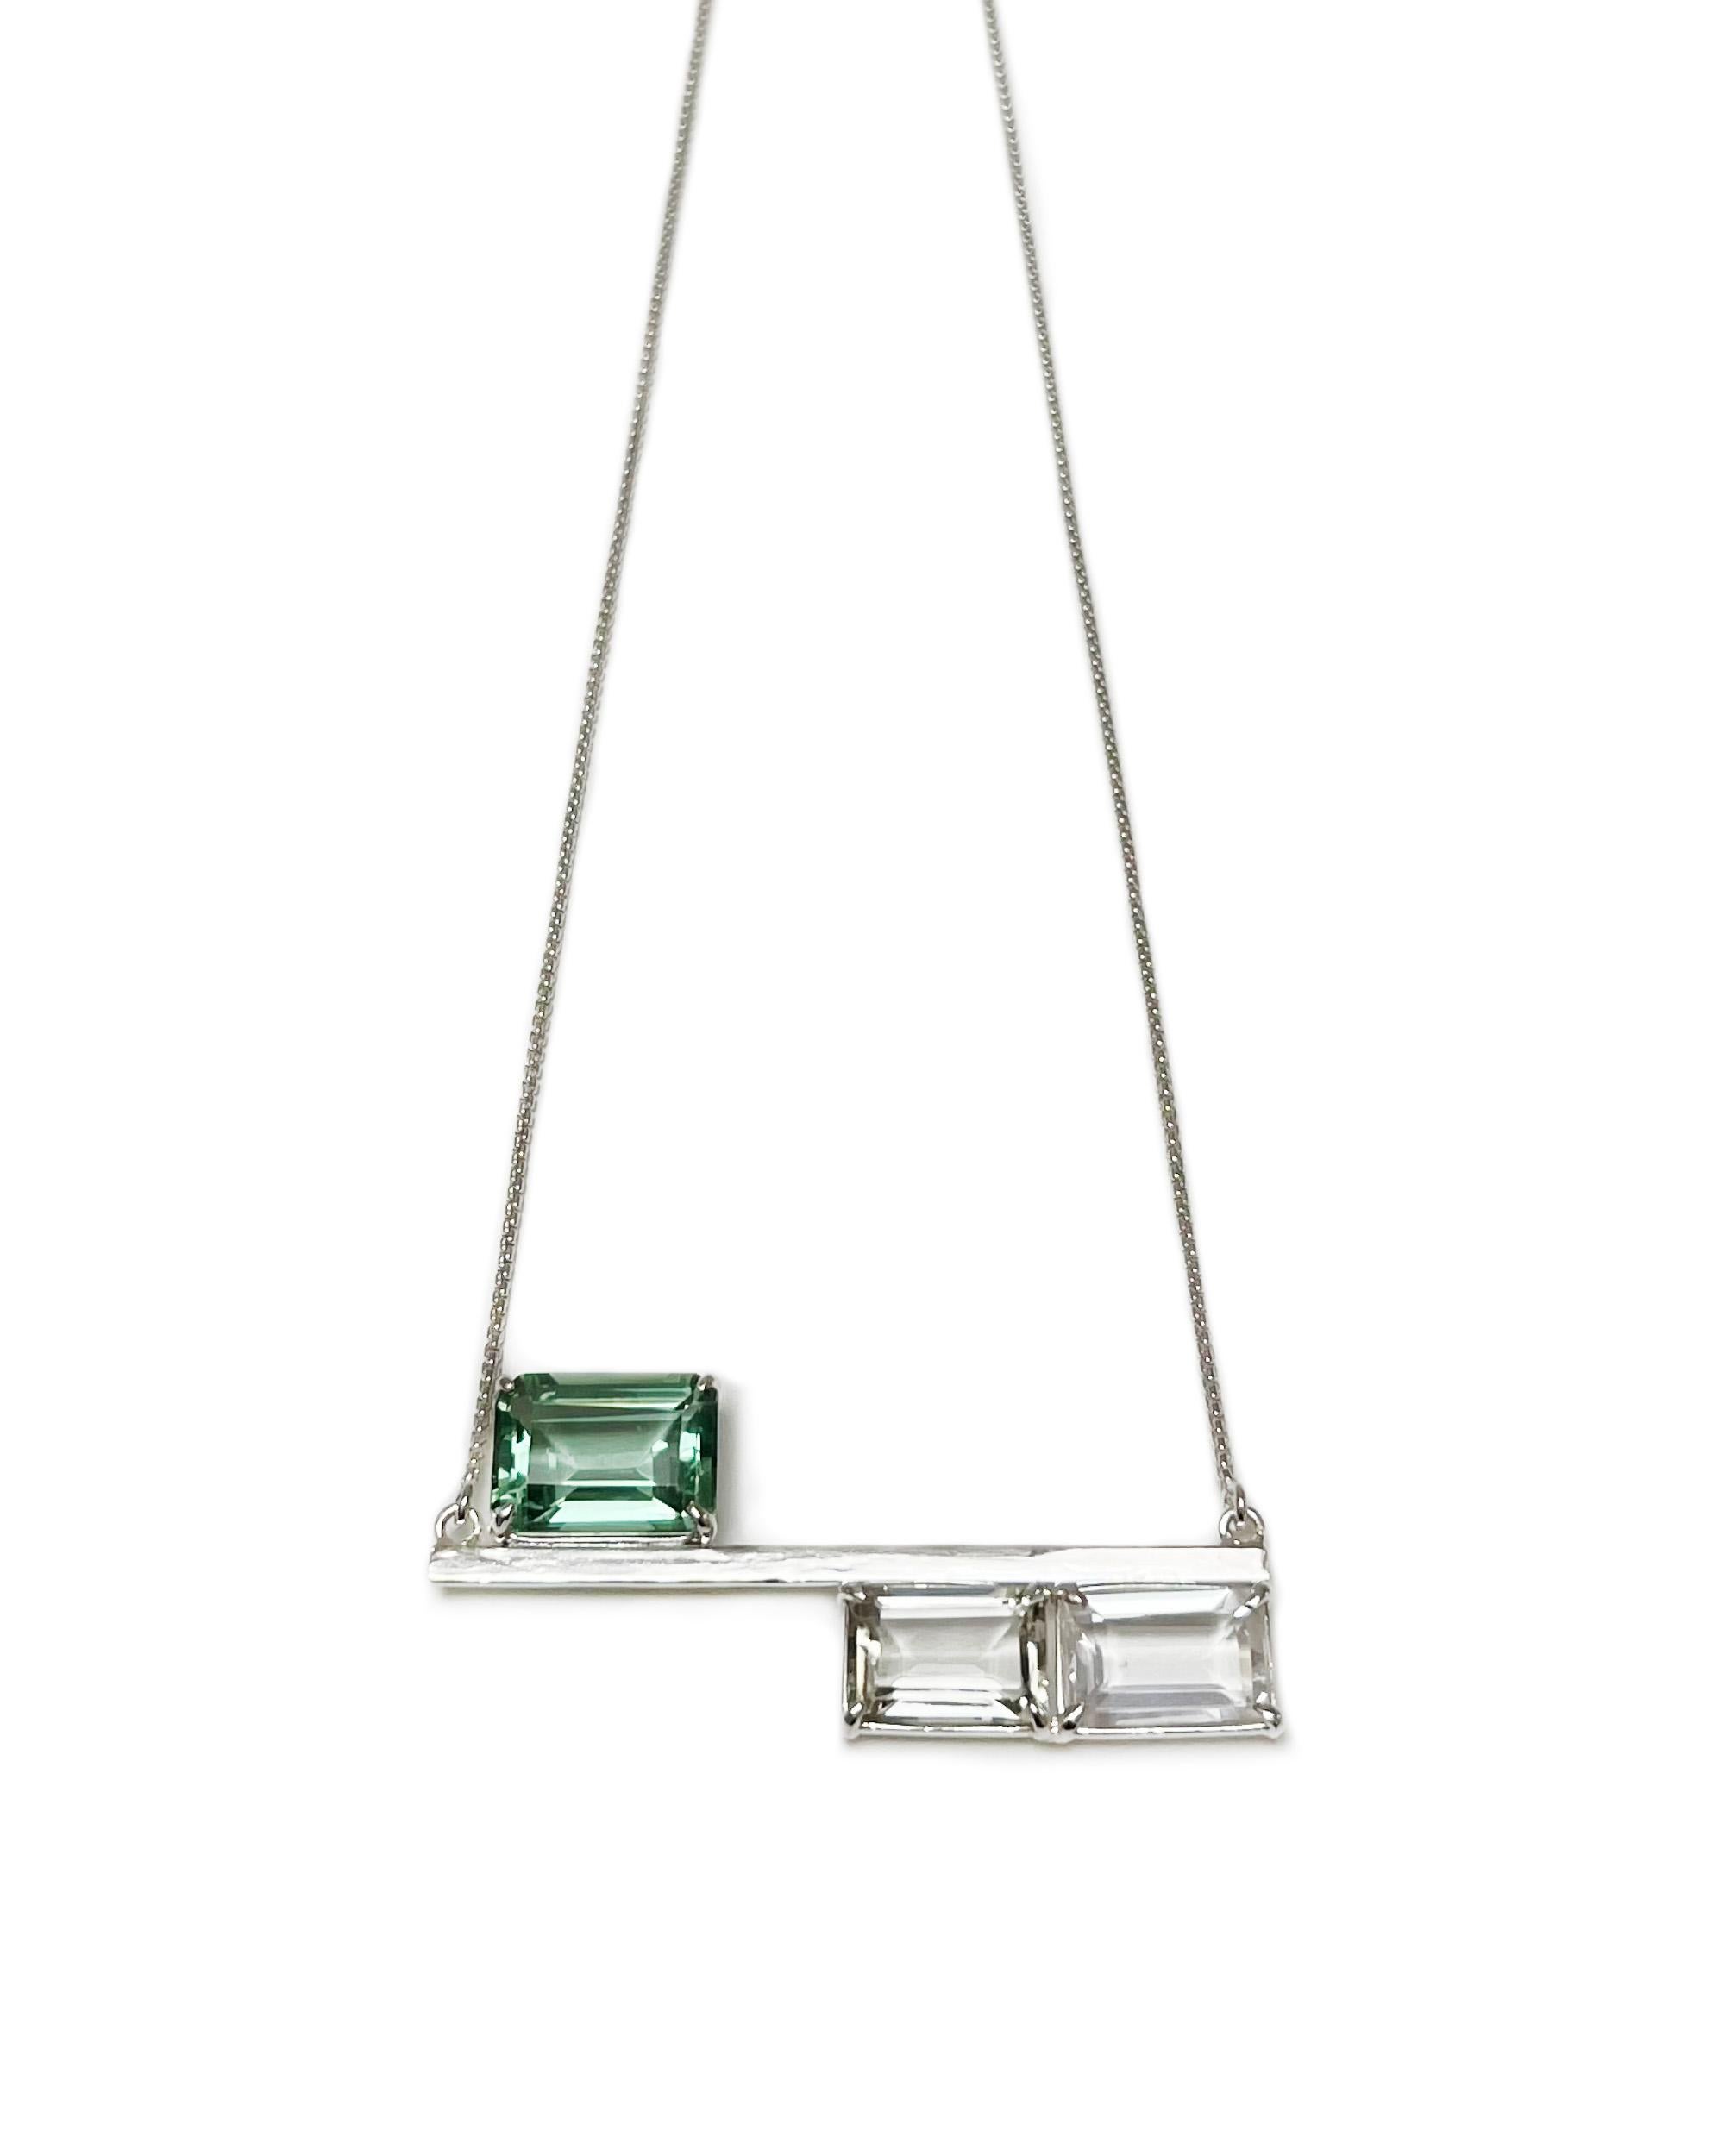 Contemporary Balance Necklace in Green Quartz, Prasiolite, White Topaz and Sterling Silver For Sale